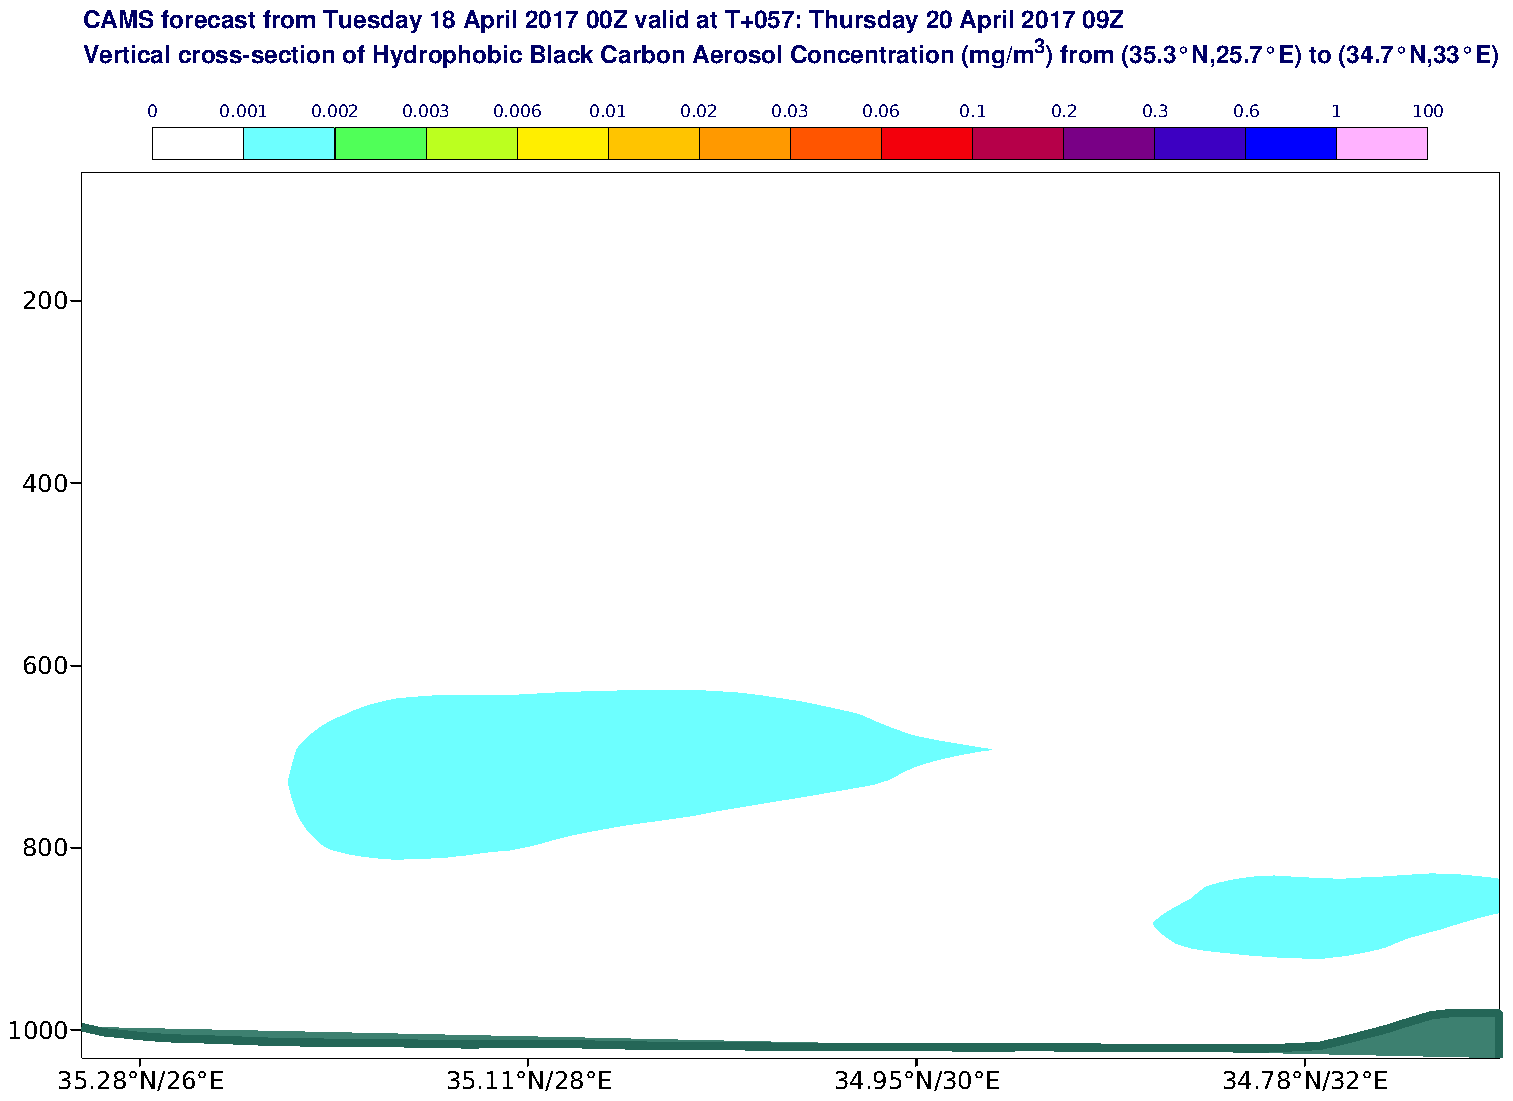 Vertical cross-section of Hydrophobic Black Carbon Aerosol Concentration (mg/m3) valid at T57 - 2017-04-20 09:00